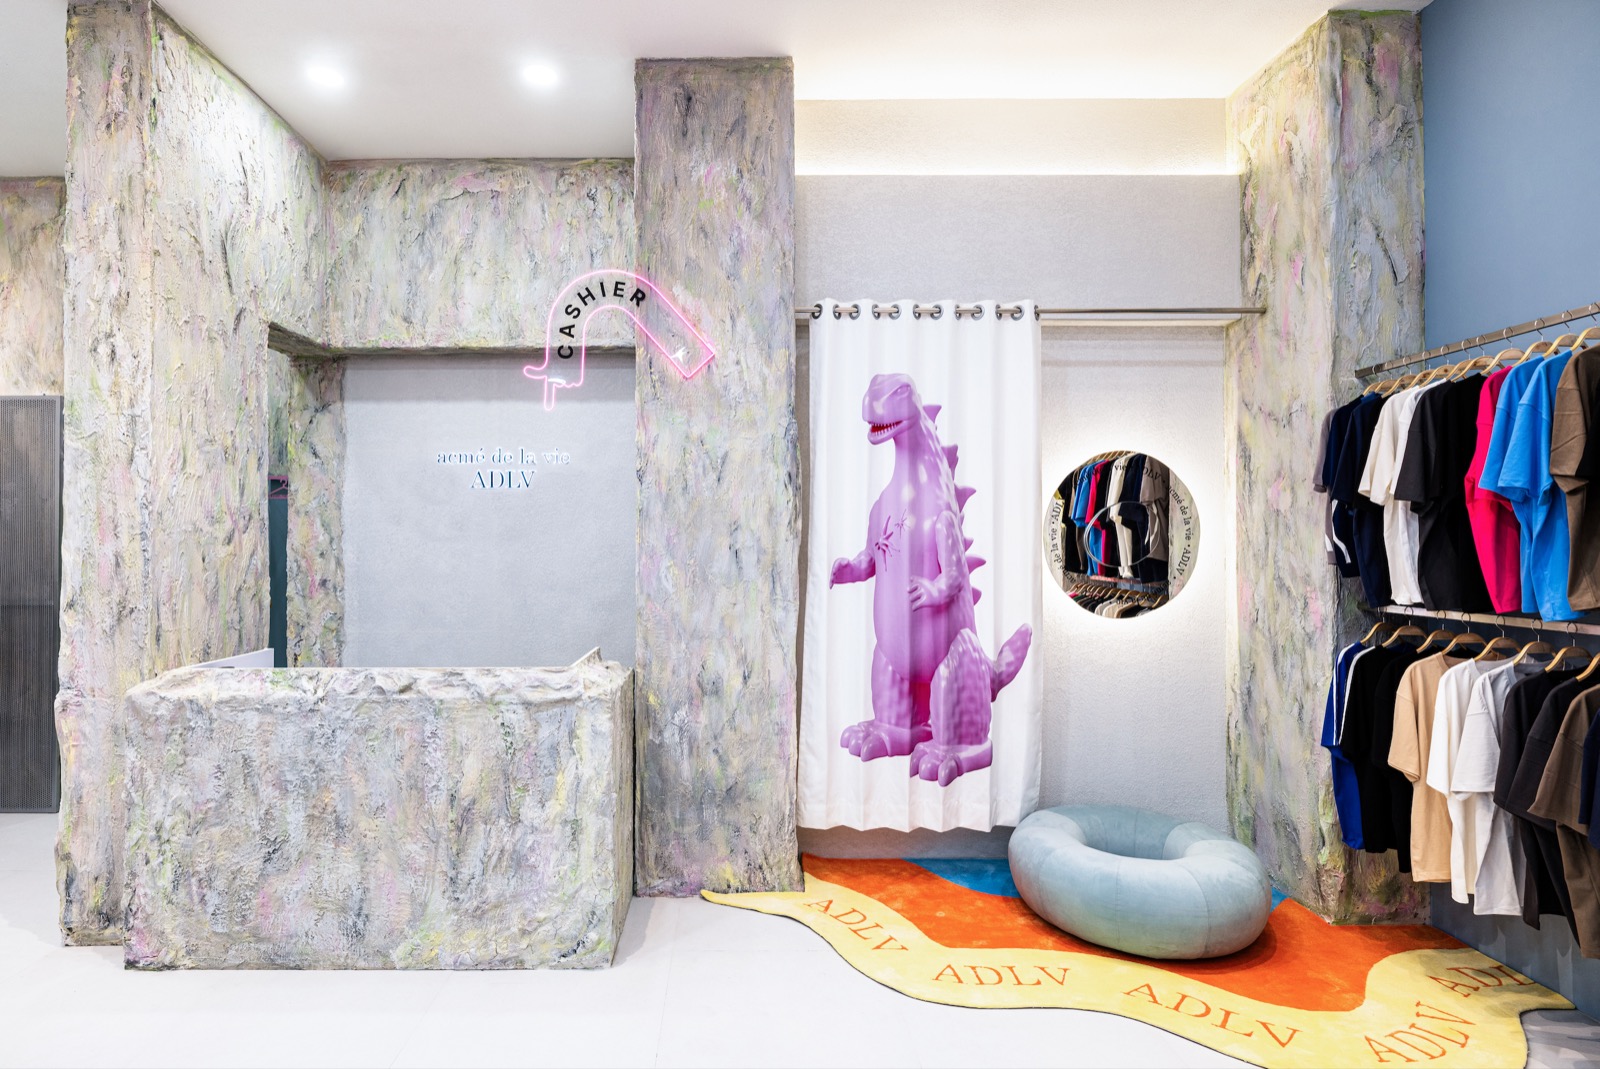 VERSHOME and VOC Studio Introduce ADLV’s First Store in Indonesia